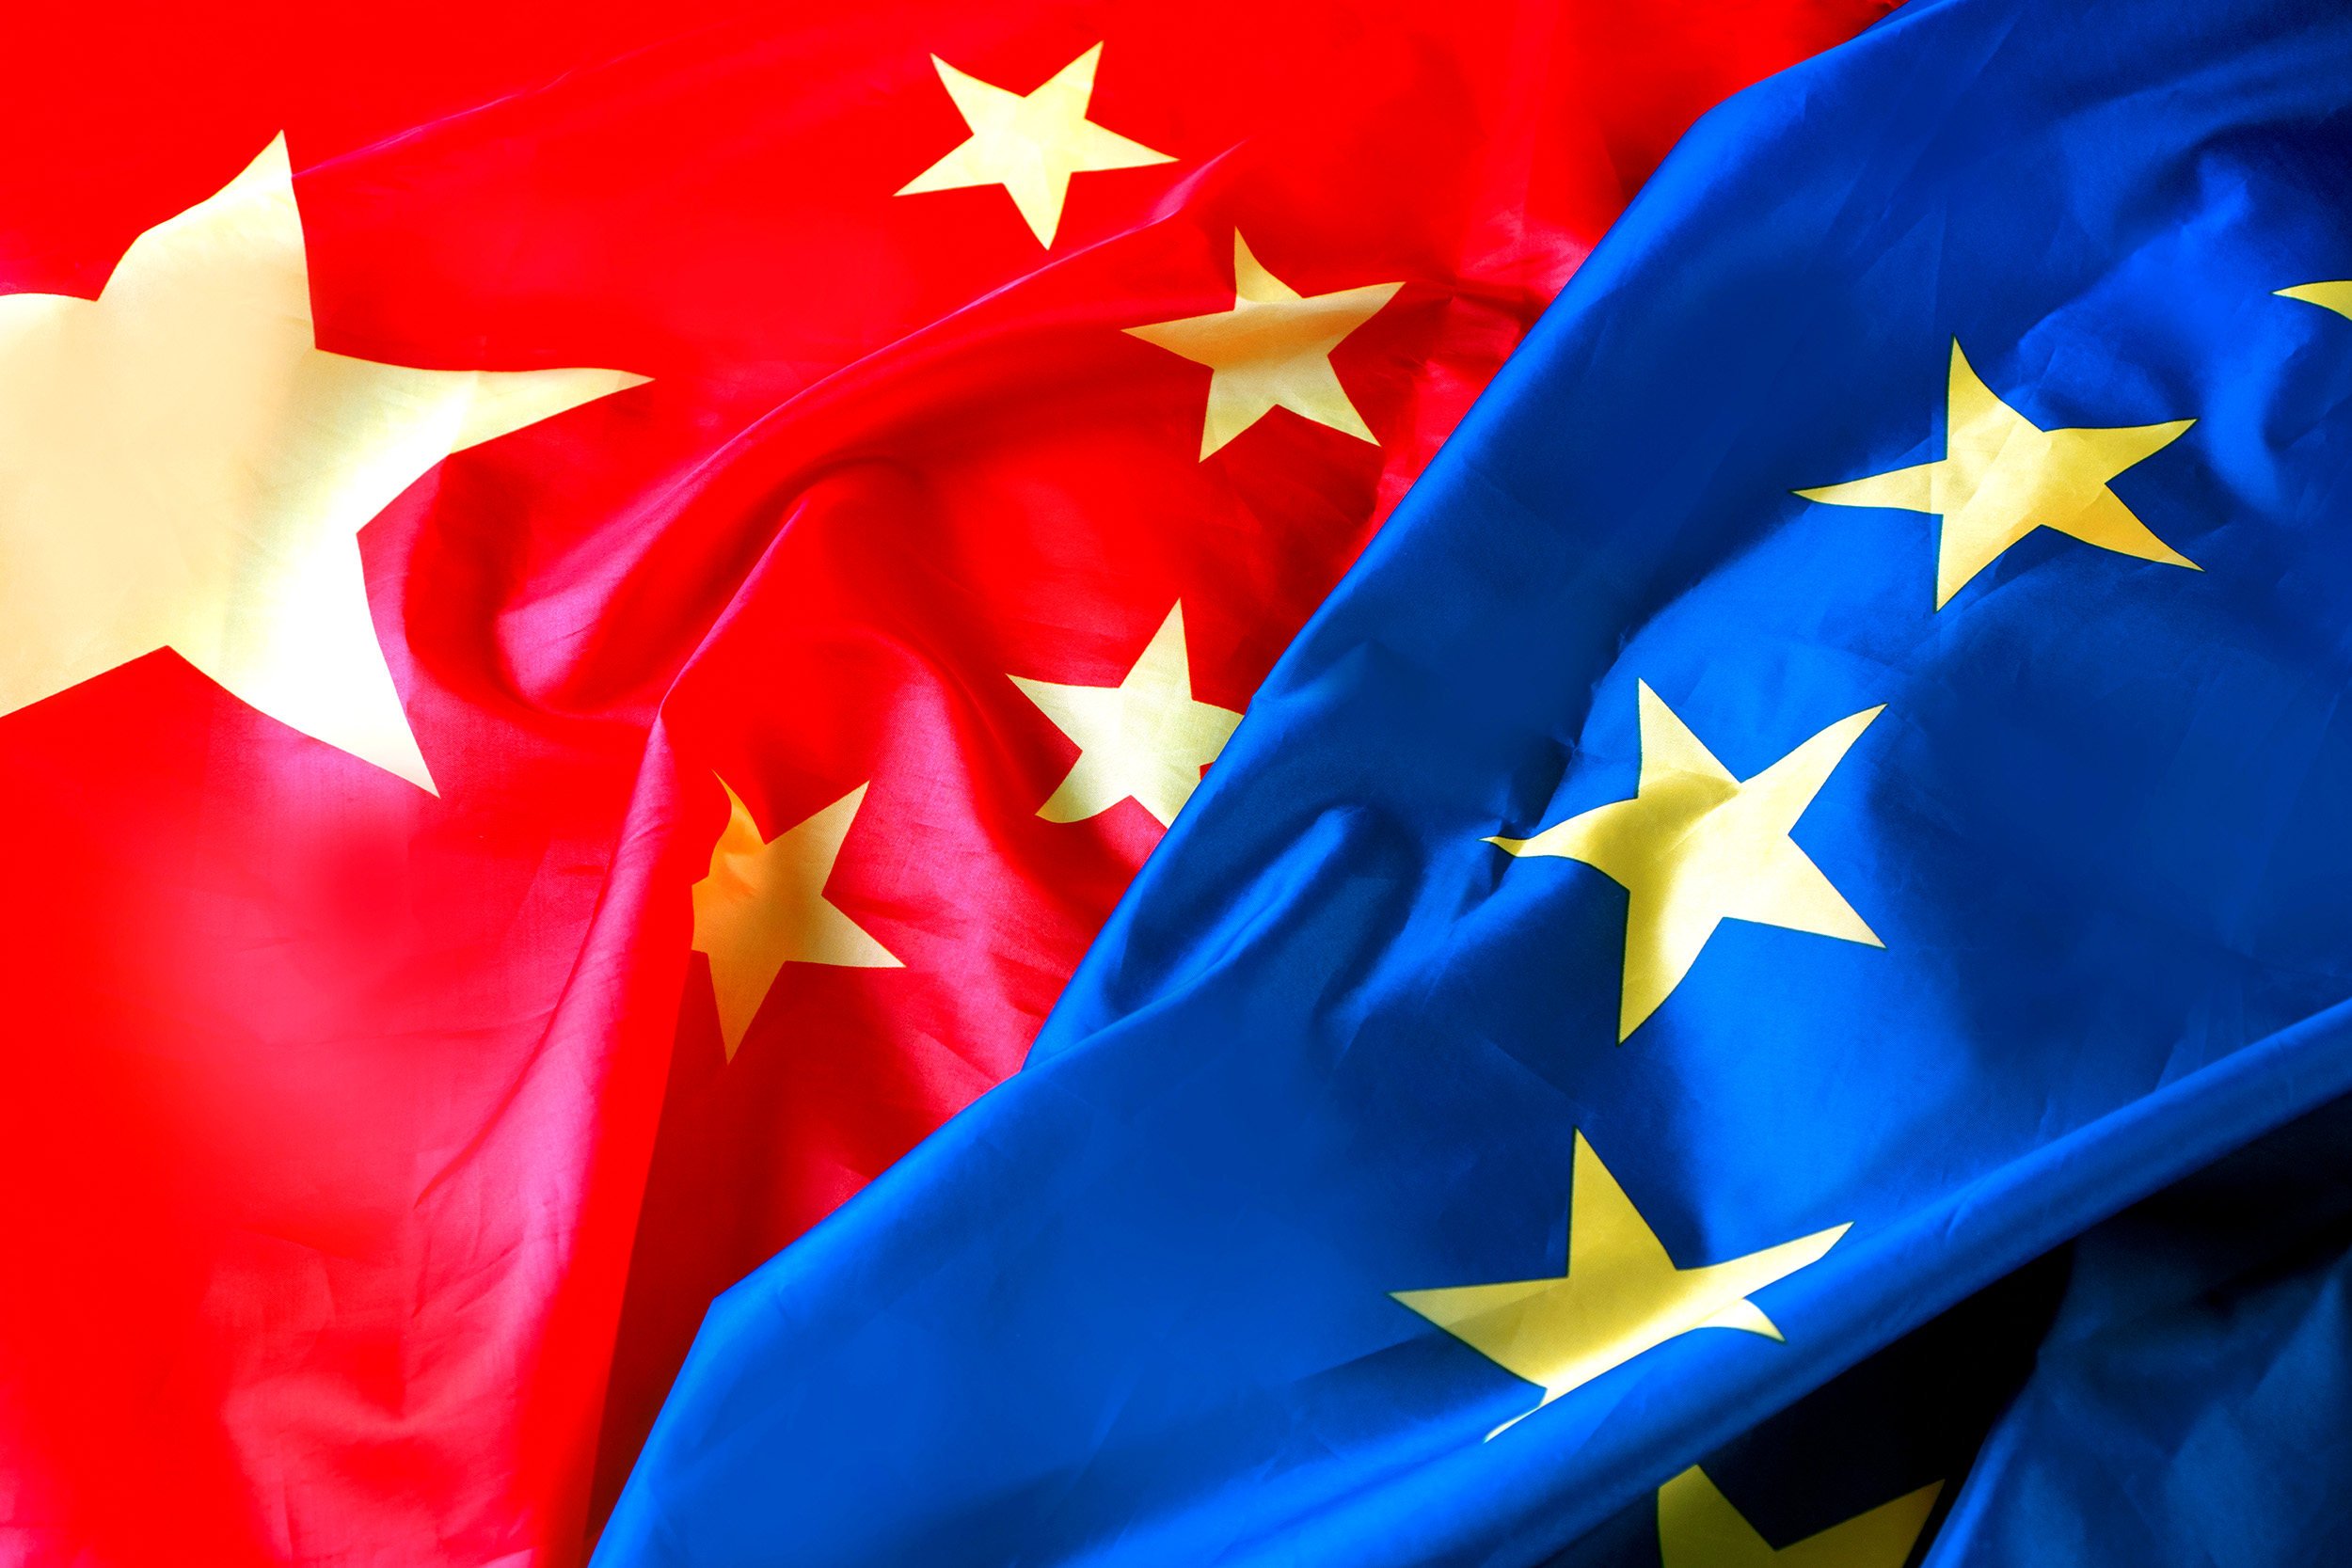 The annual EU-China summit is expected to take place later this year, but a date has yet to be set. Photo: Shutterstock